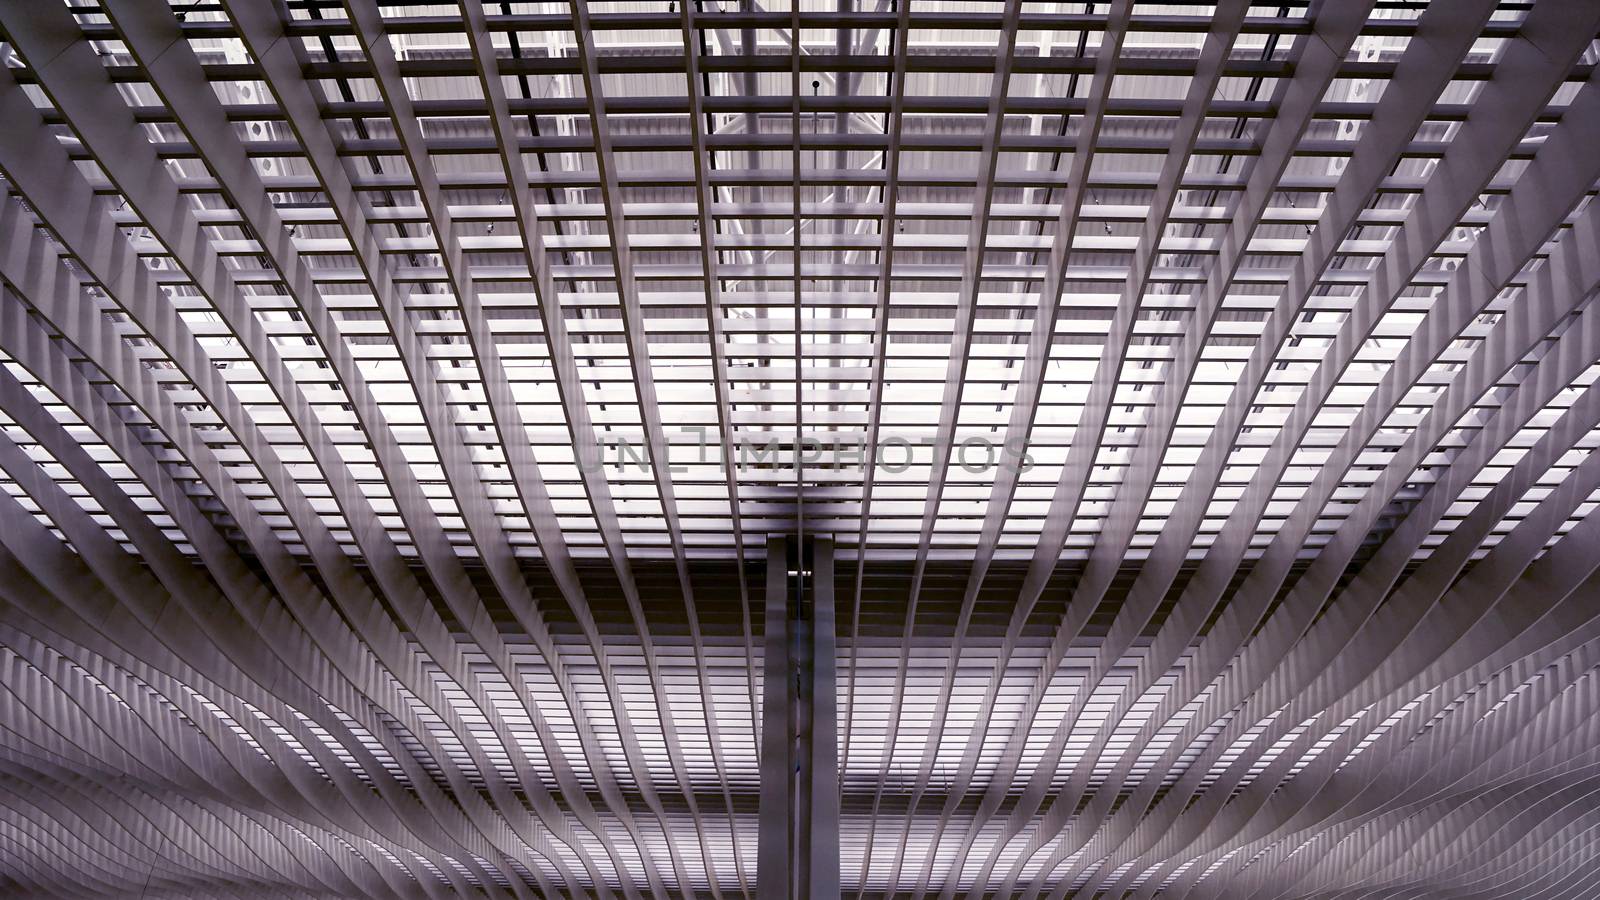 The interior and ceiling of airport archtecture terminal building